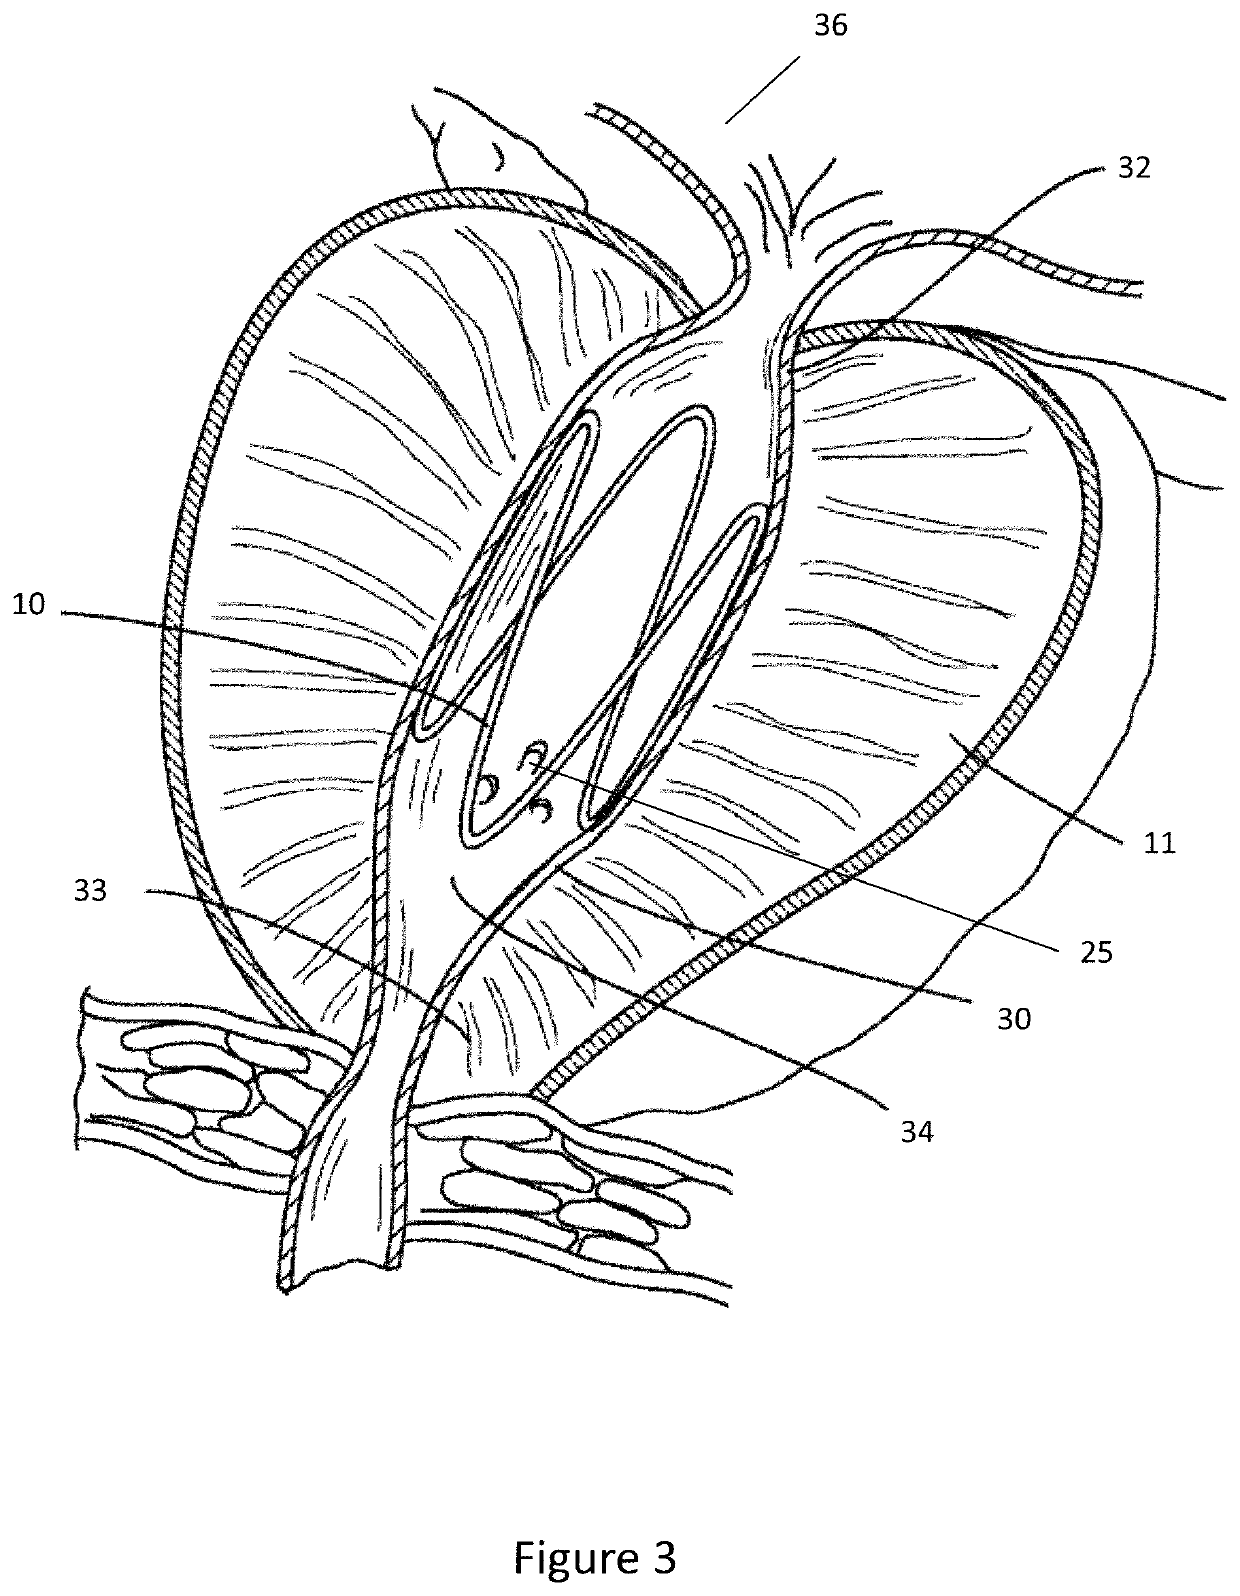 Expandable implant delivery device